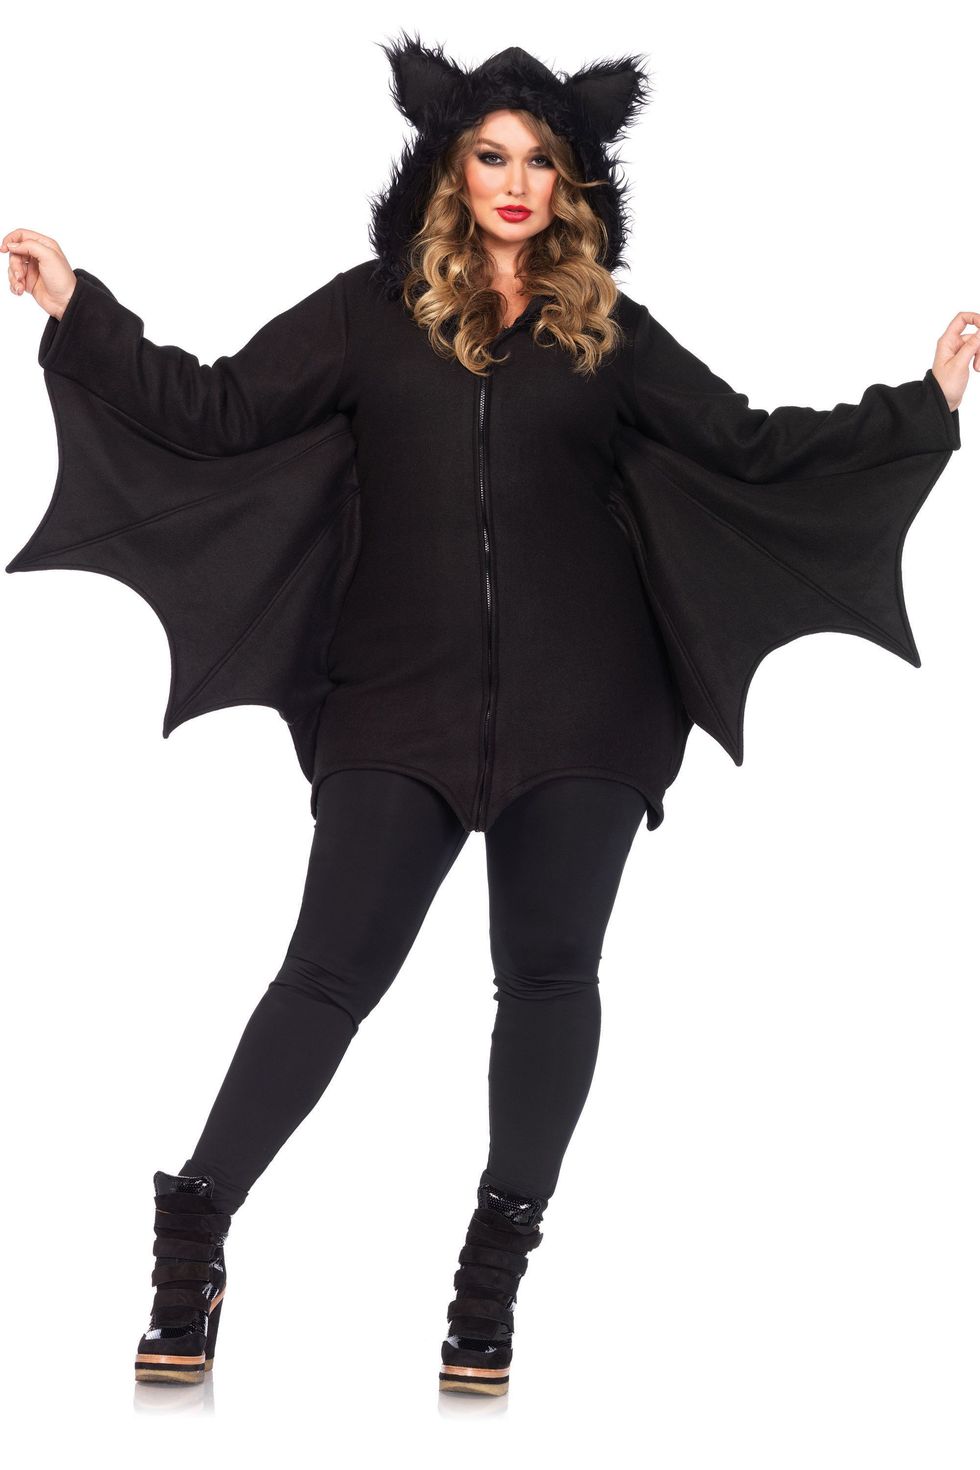 20 Best Plus Size Halloween Costumes - Plus Size Costume Ideas for